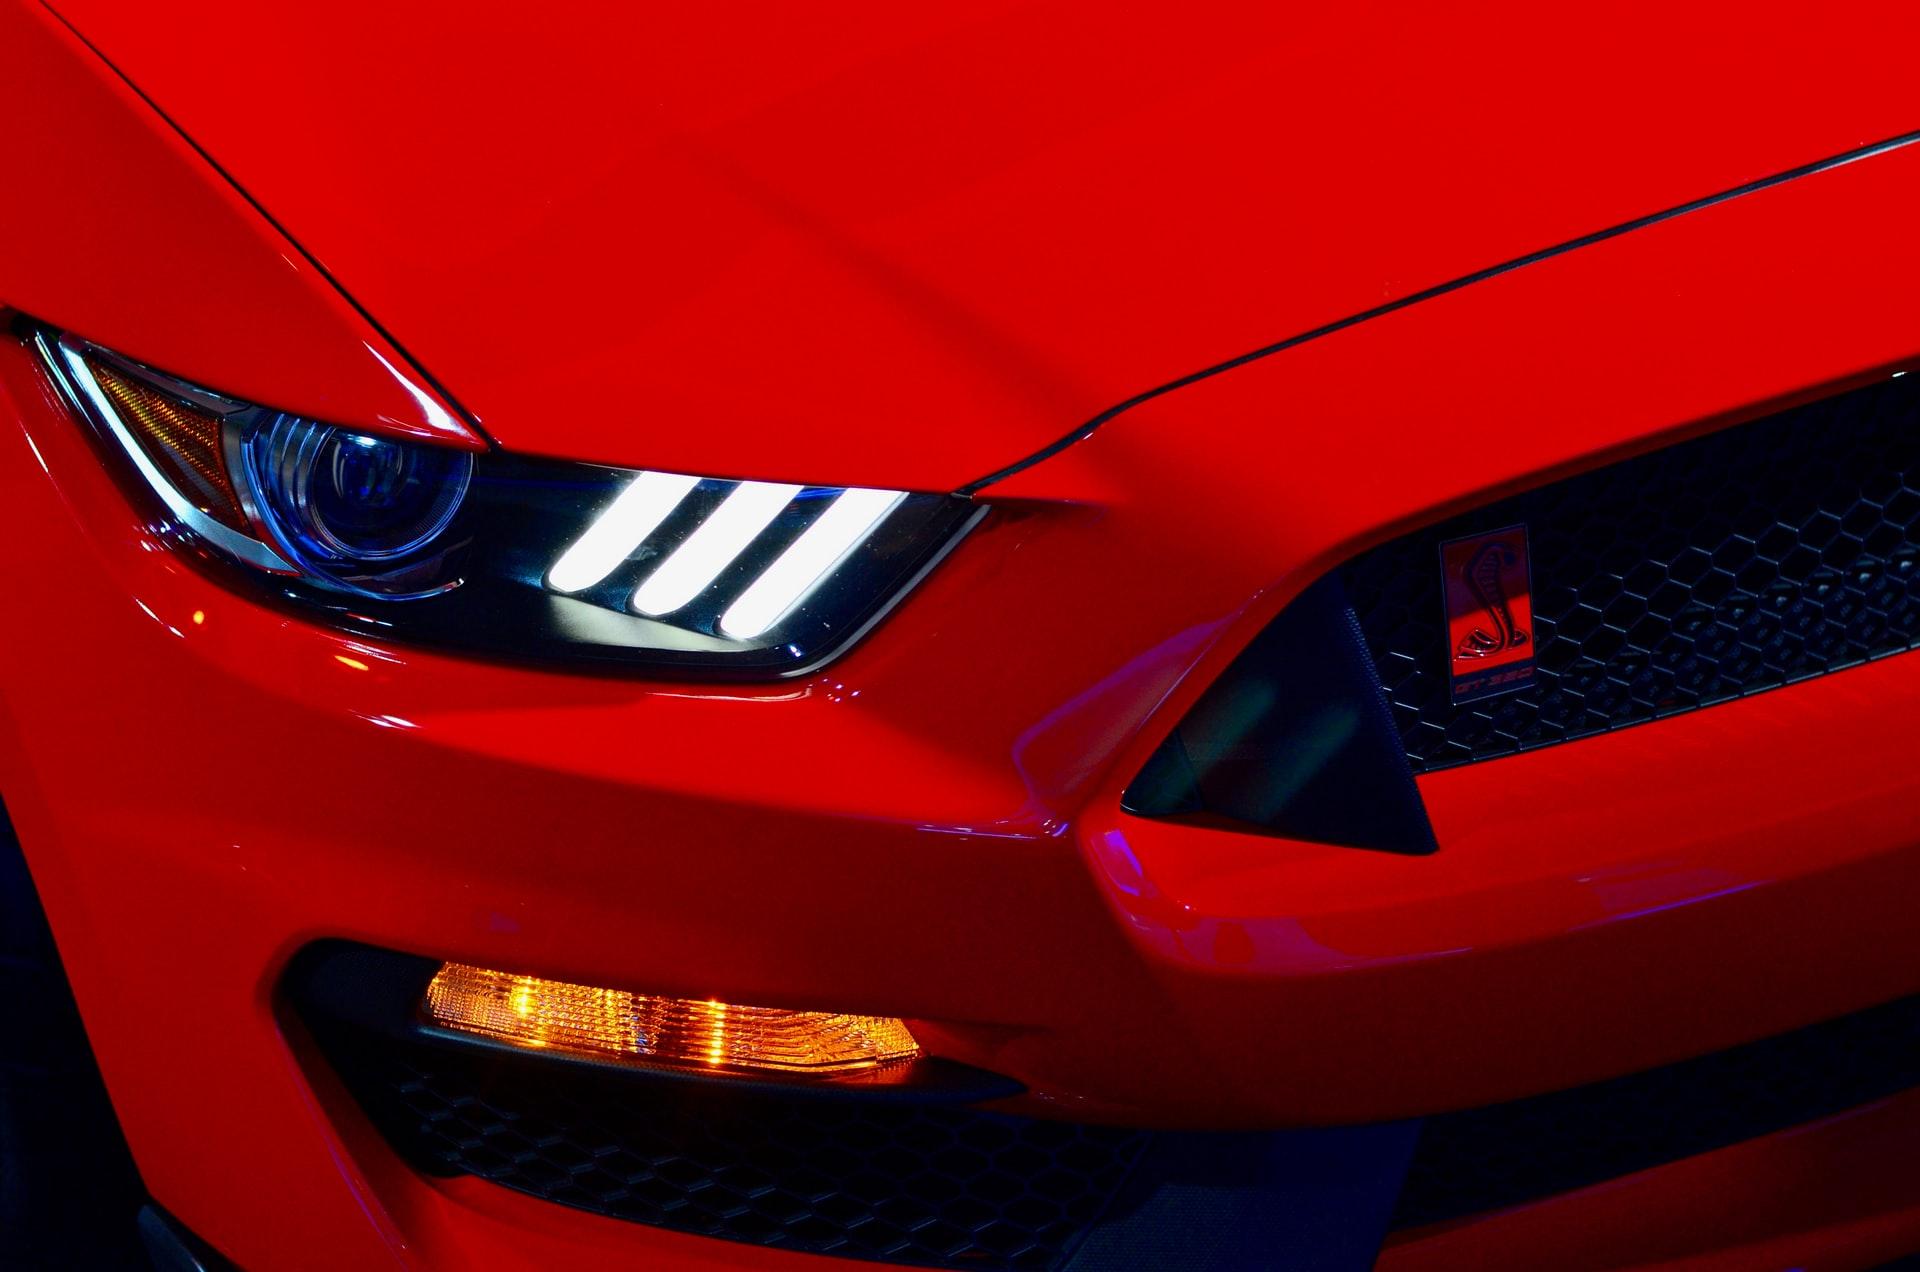 The 2021 Shelby Mustang Super Snake is a Mustang like no other. 